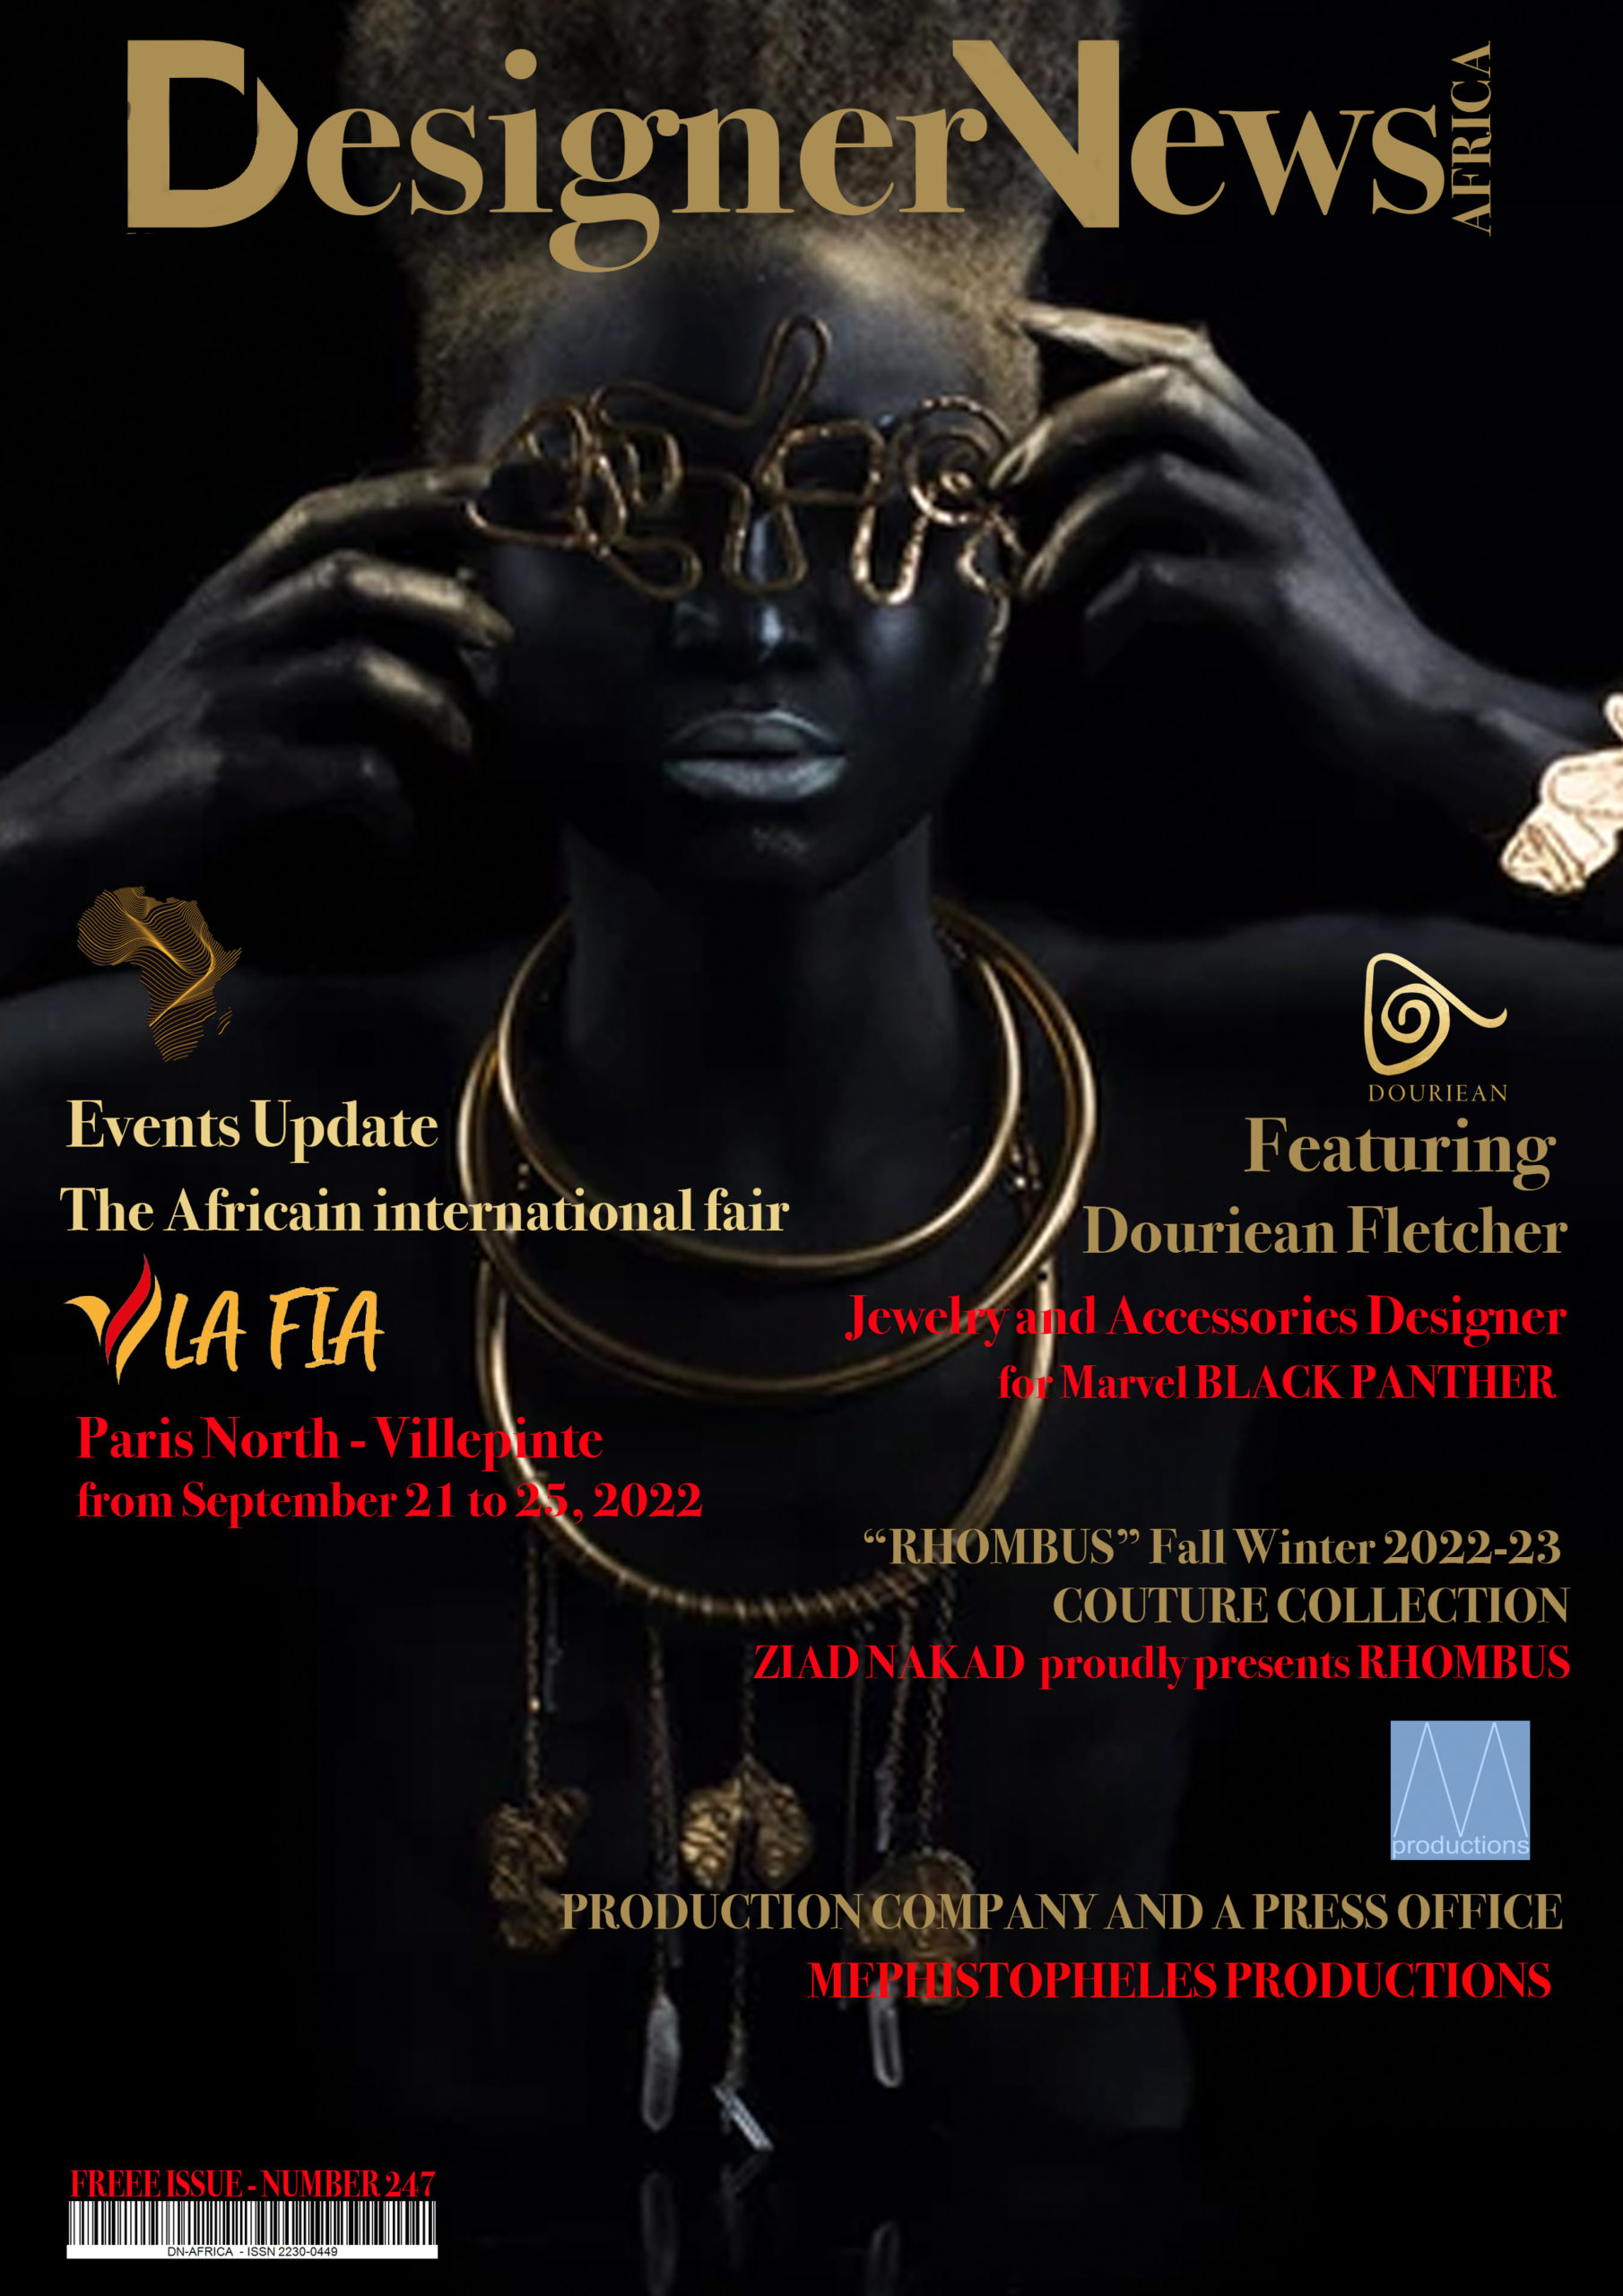 DN-AFRICA-COVER-AUG-2022-MAG-NUMBER-247-Douriean-Fletcher-Jewelry-and-Accessories-Designer-for-Marvel-BLACK-PANTHER-DN-AFRICA-DN-A-INTERNATIONAL-Media-Partner-AS-VOGUE-COVER